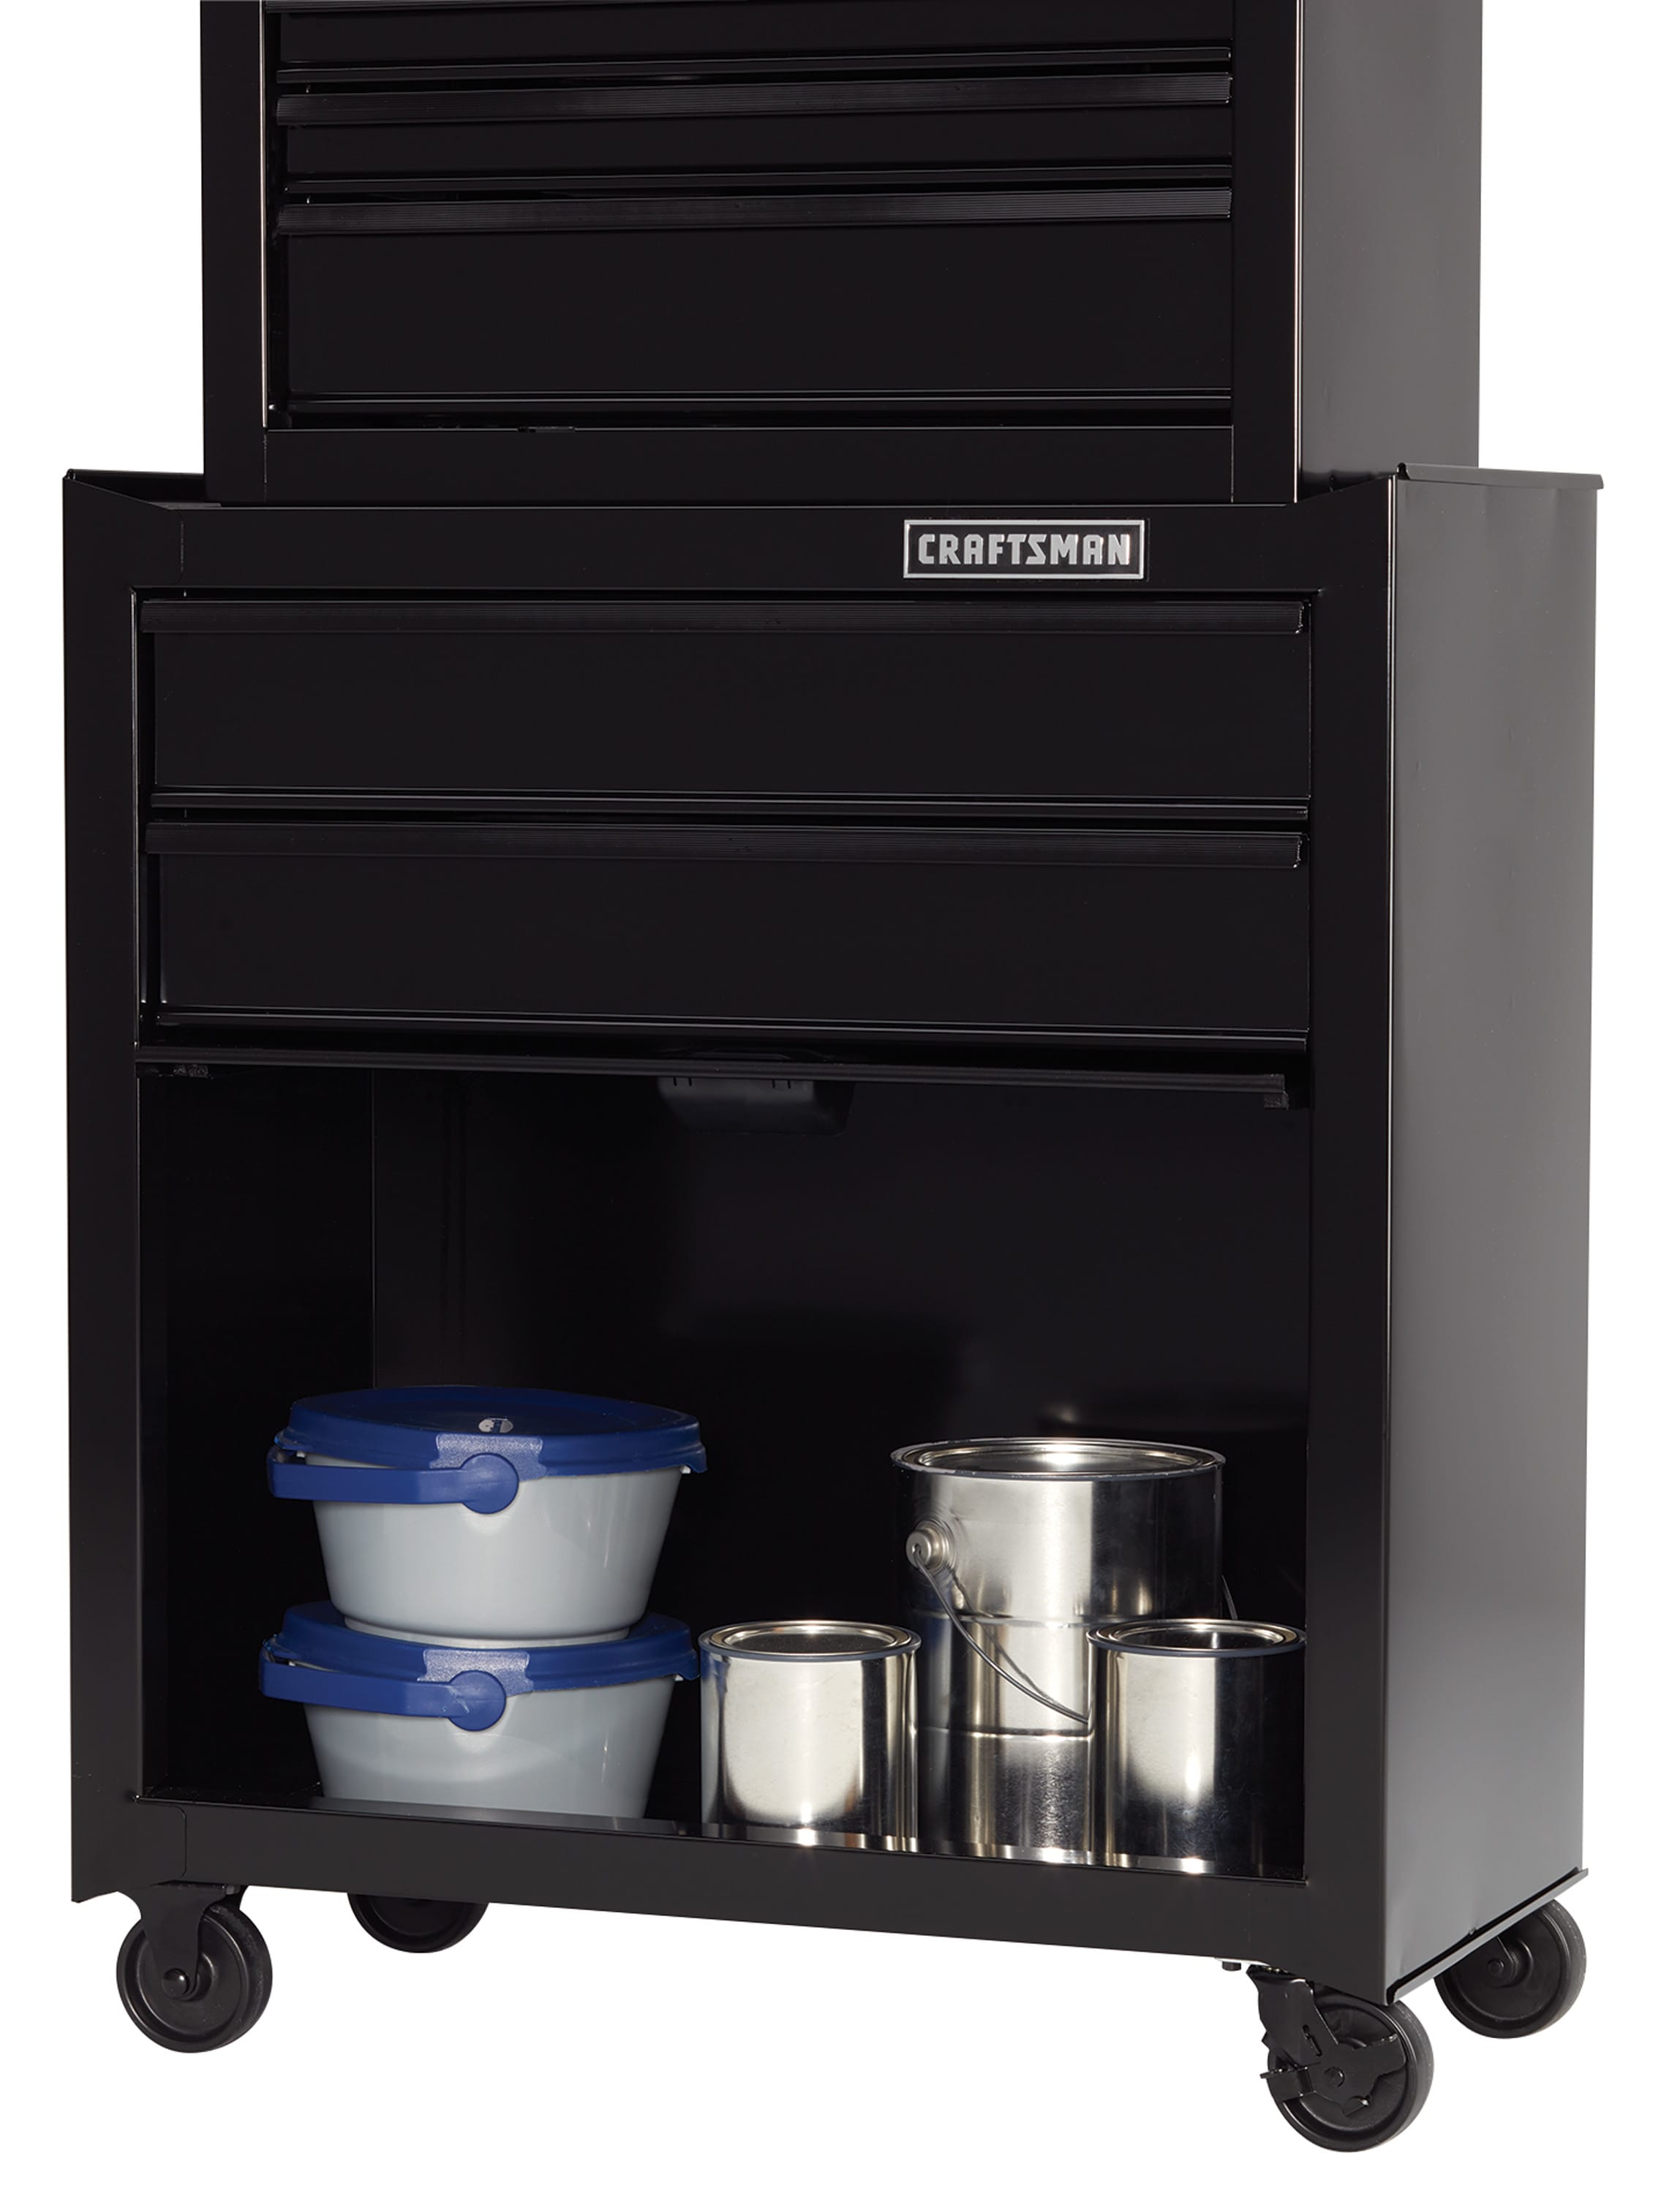 Channellock 26 In. 5-Drawer Tool Roller Cabinet - Gillman Home Center